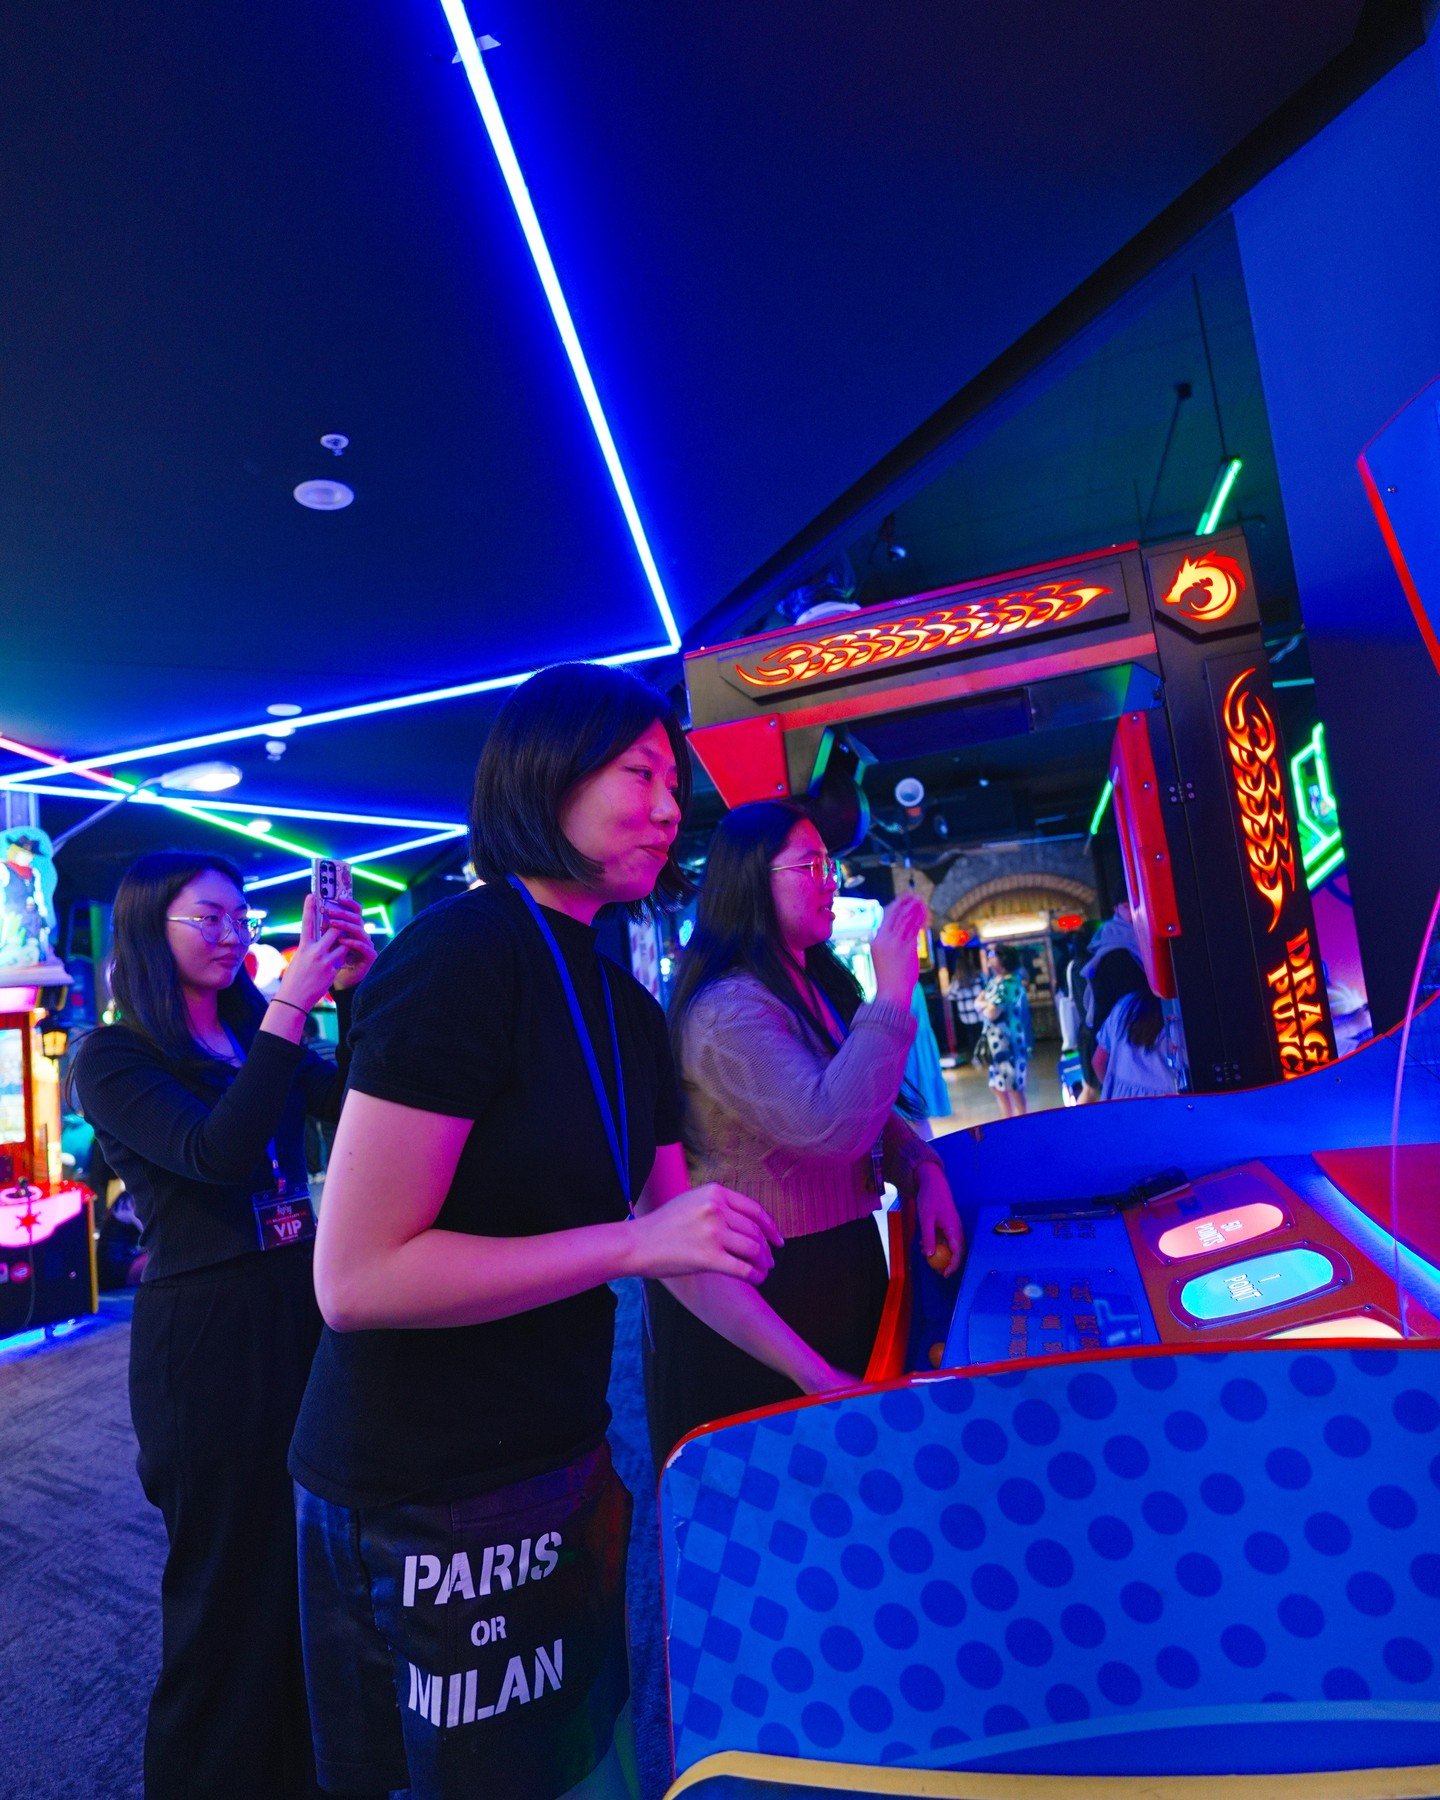 Level up your night at Replay Bankstown - eat, drink, play, sing! 🍣🎳🎤🍹 

We've got all the lit vibes on deck! 🔥Come check us out! 😎

📍 Level 1 of @littlesaigonplaza
📞 1800 620 018
📩 info@replaybankstown.com

#KaraokeBankstown #SydneyKaraoke 